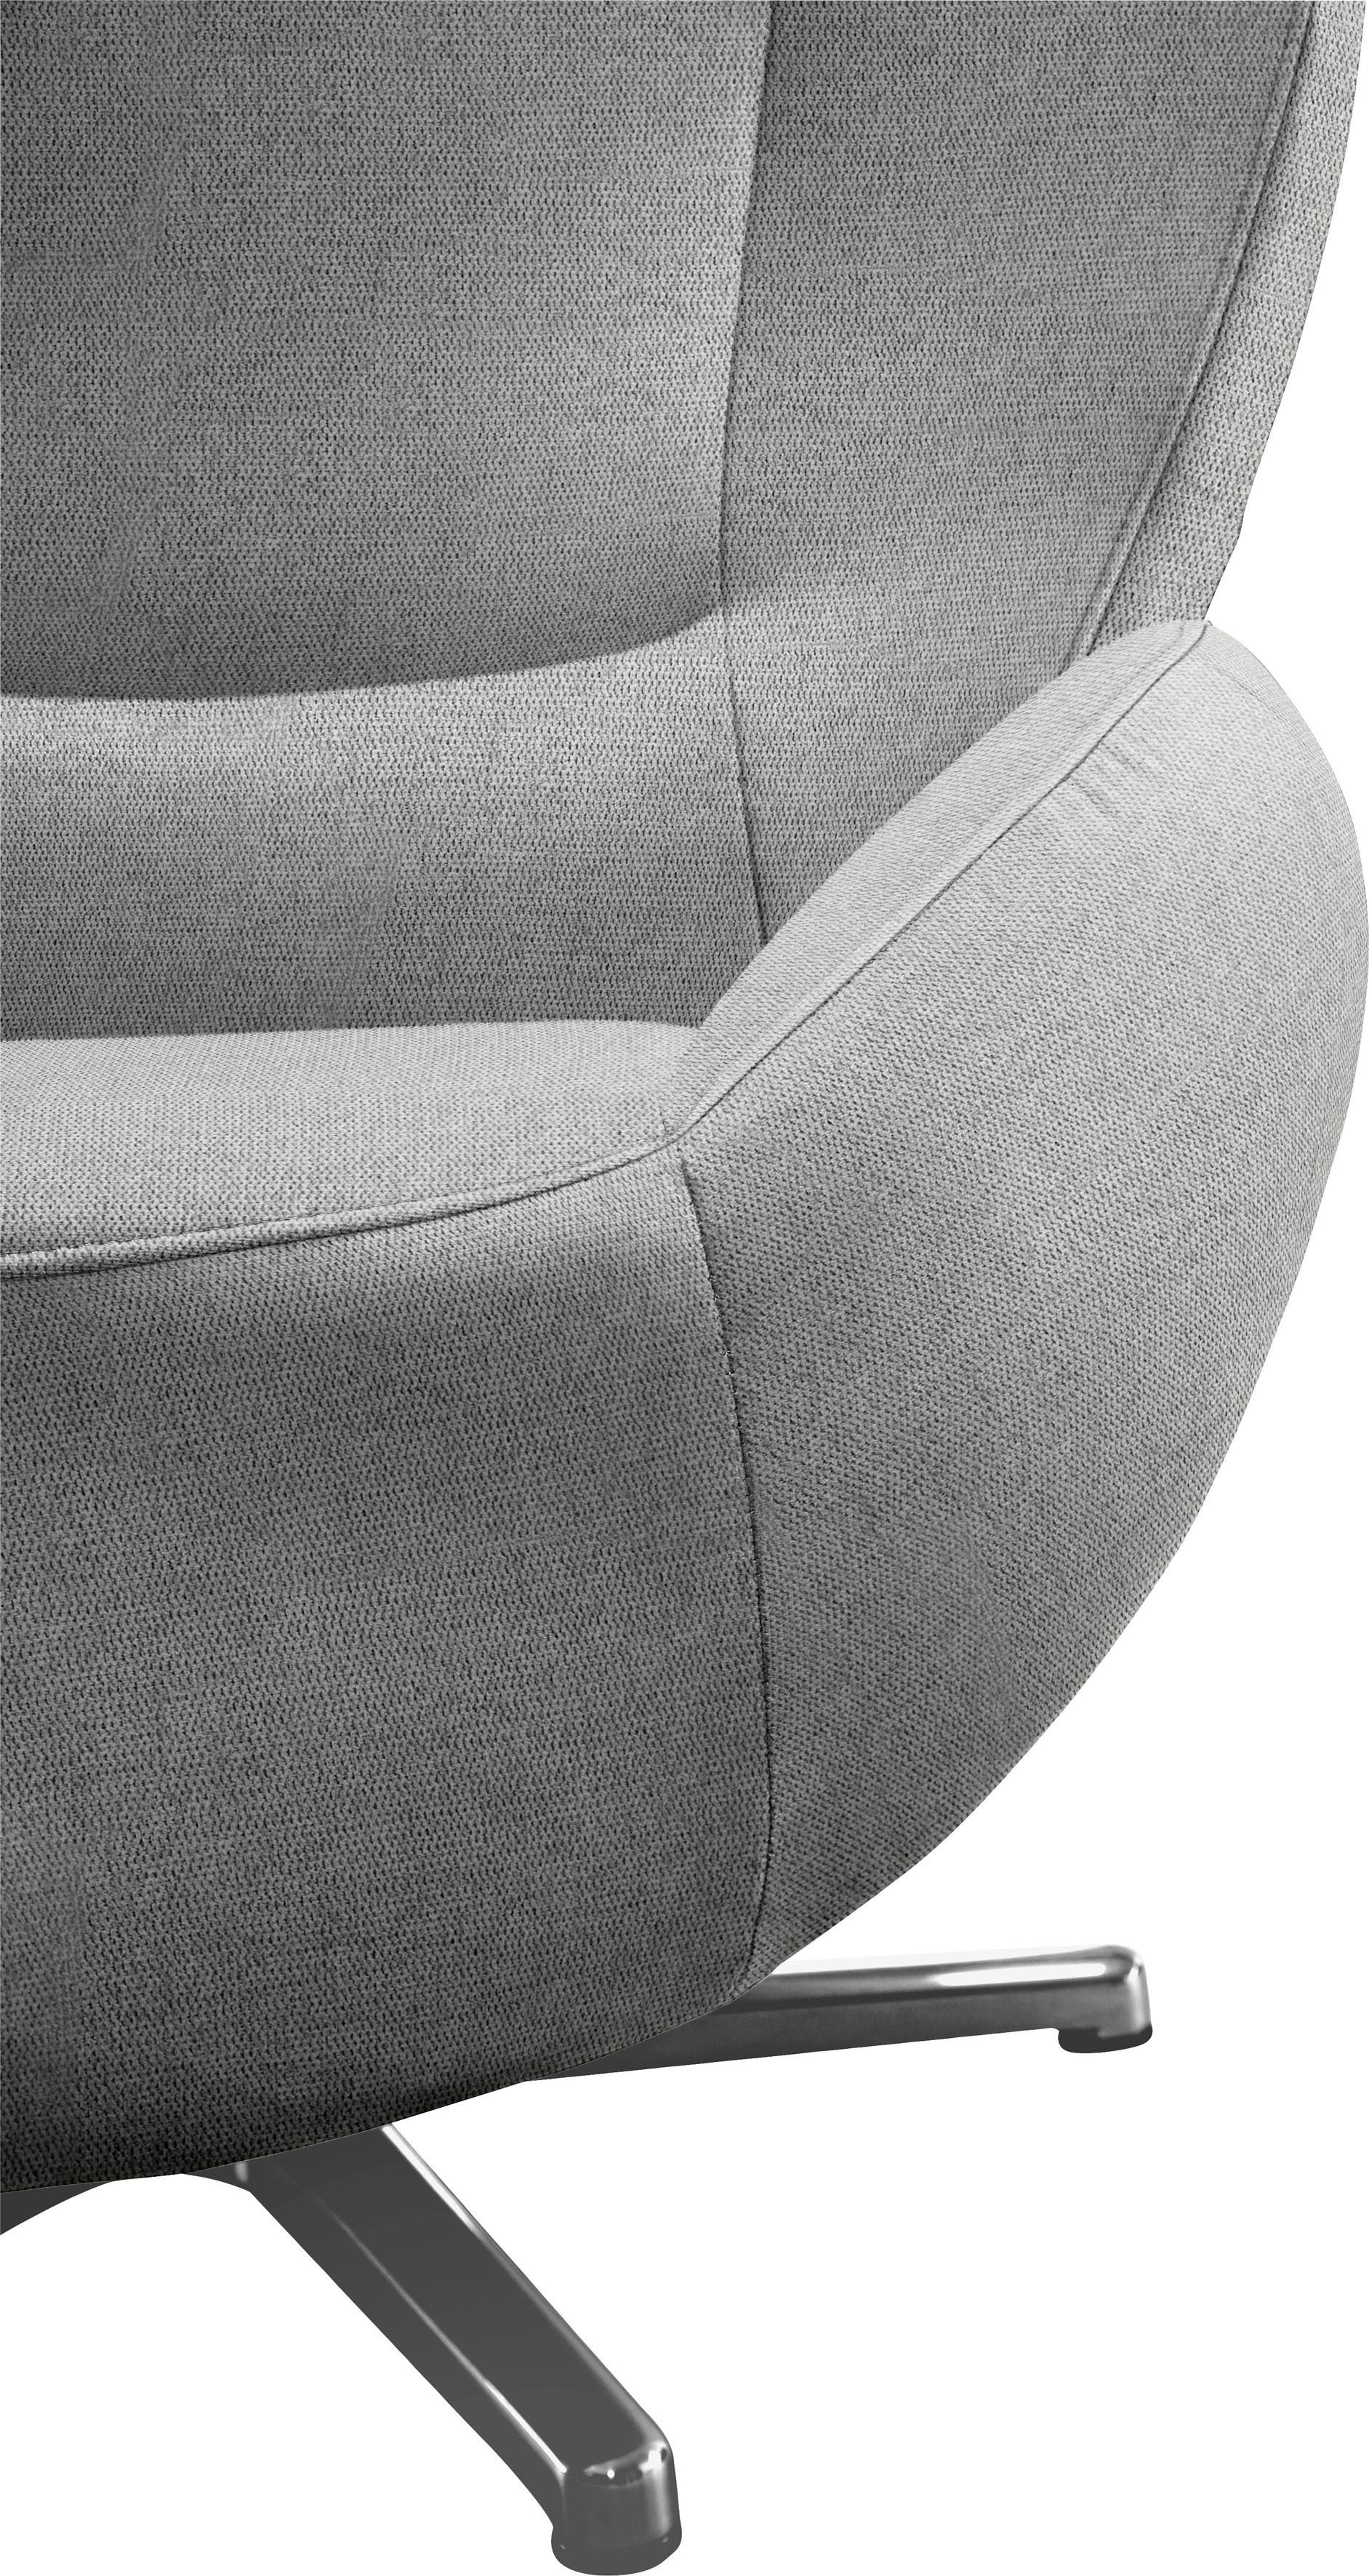 Loungesessel Chrom TAILOR PURE, mit in HOME TOM Metall-Drehfuß TOM